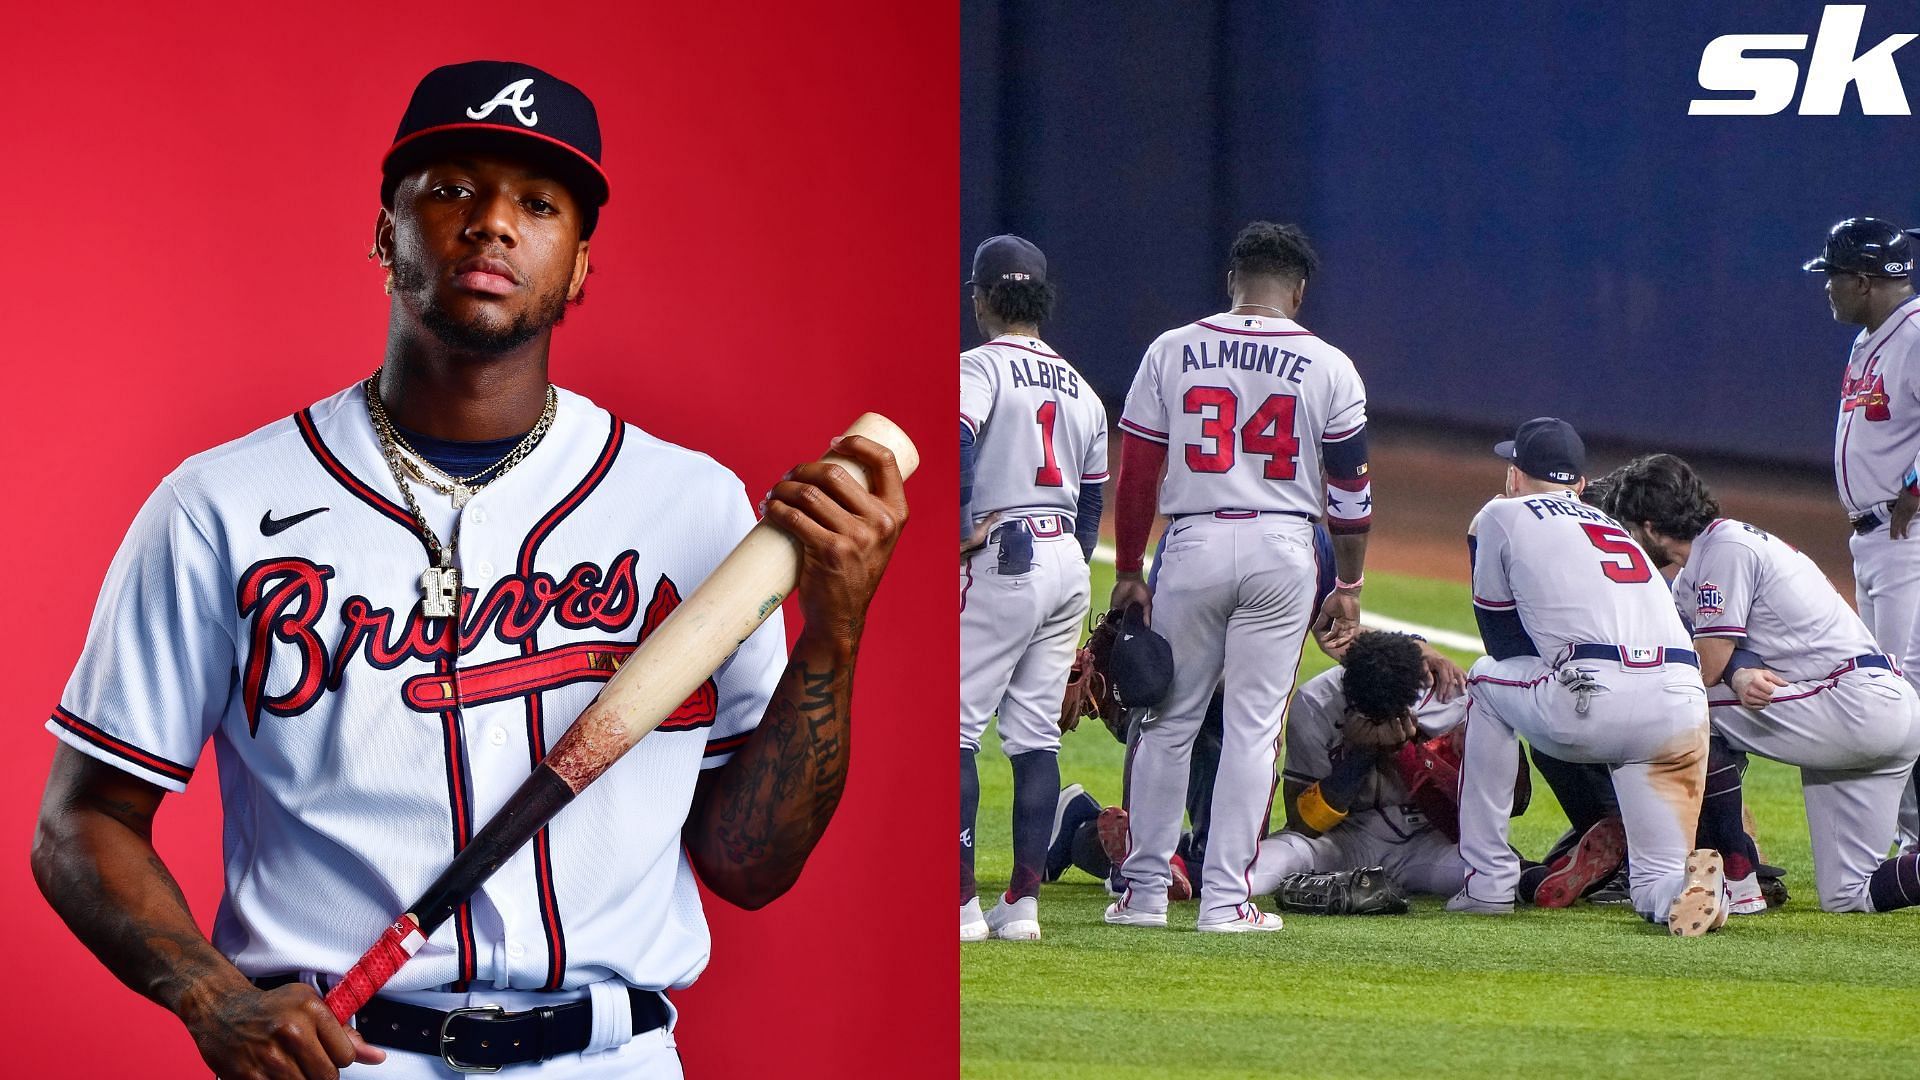 Ronald Acuna Jr. opens up about traumatic 2021 injury in emotional